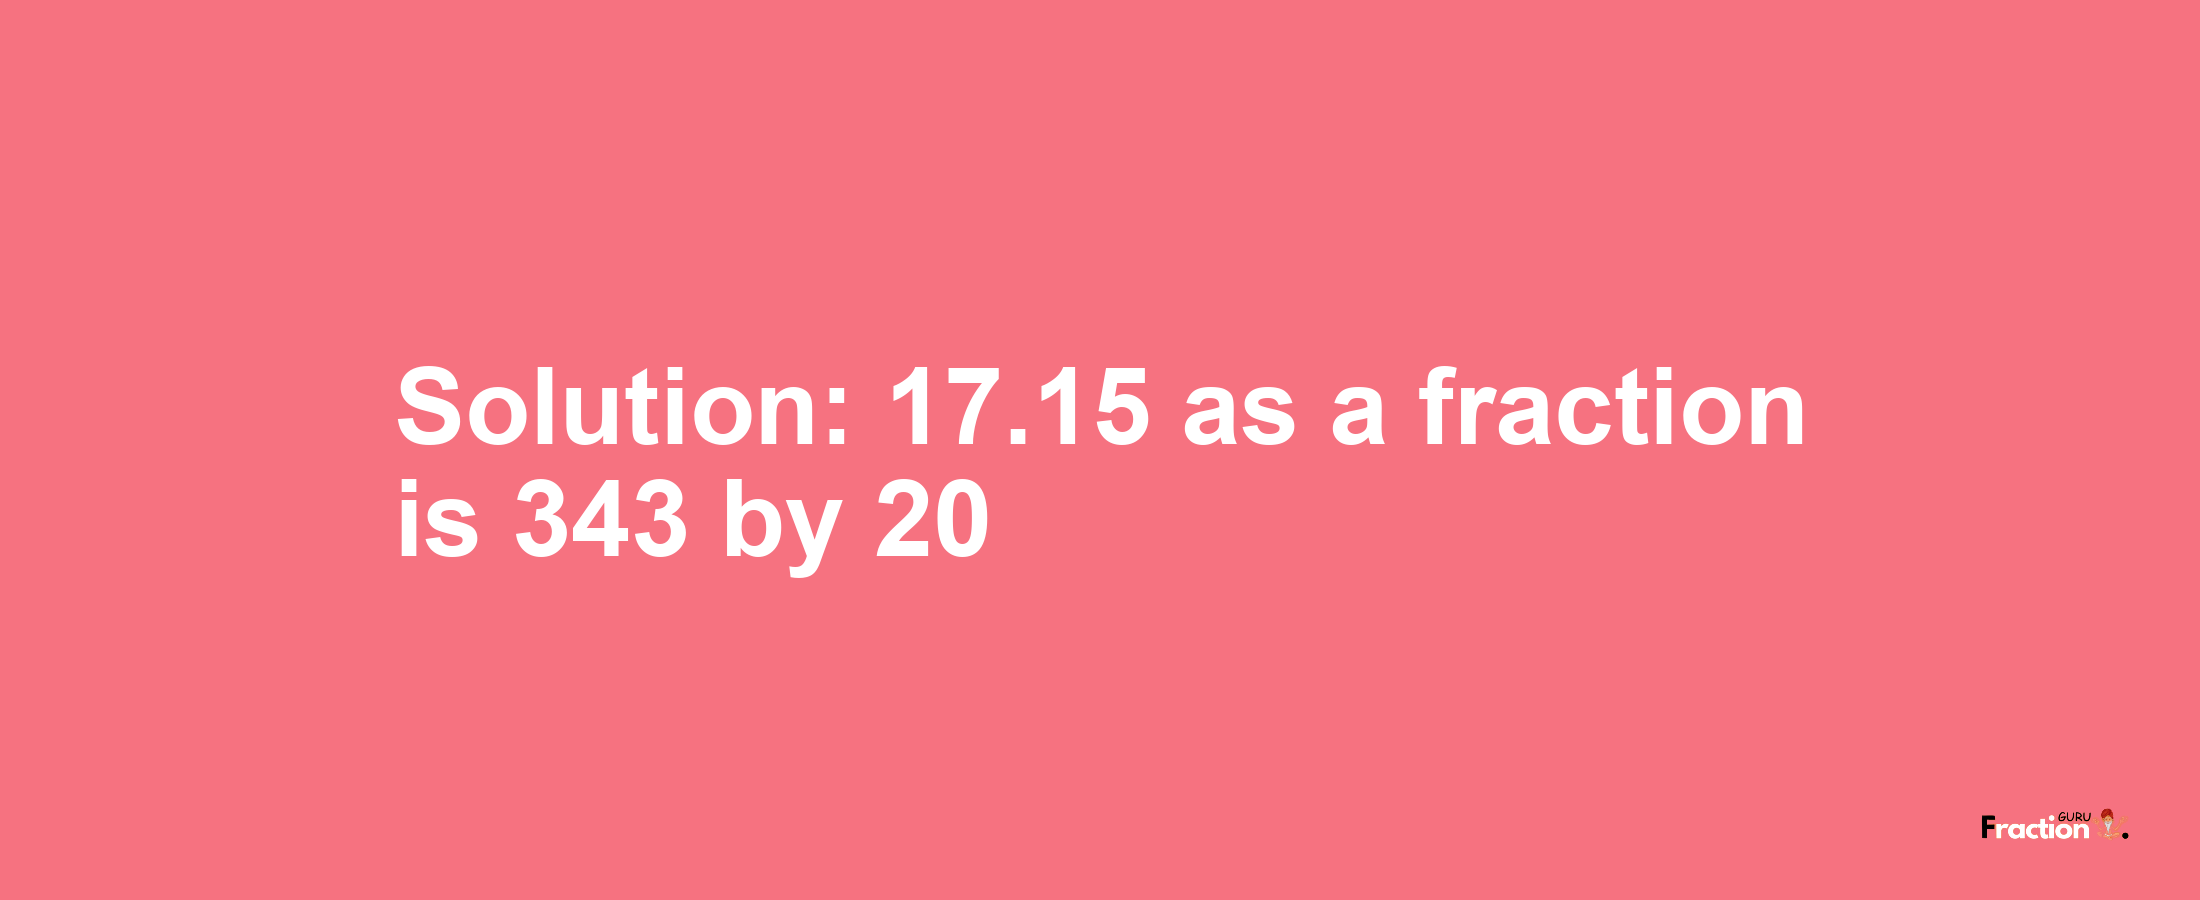 Solution:17.15 as a fraction is 343/20